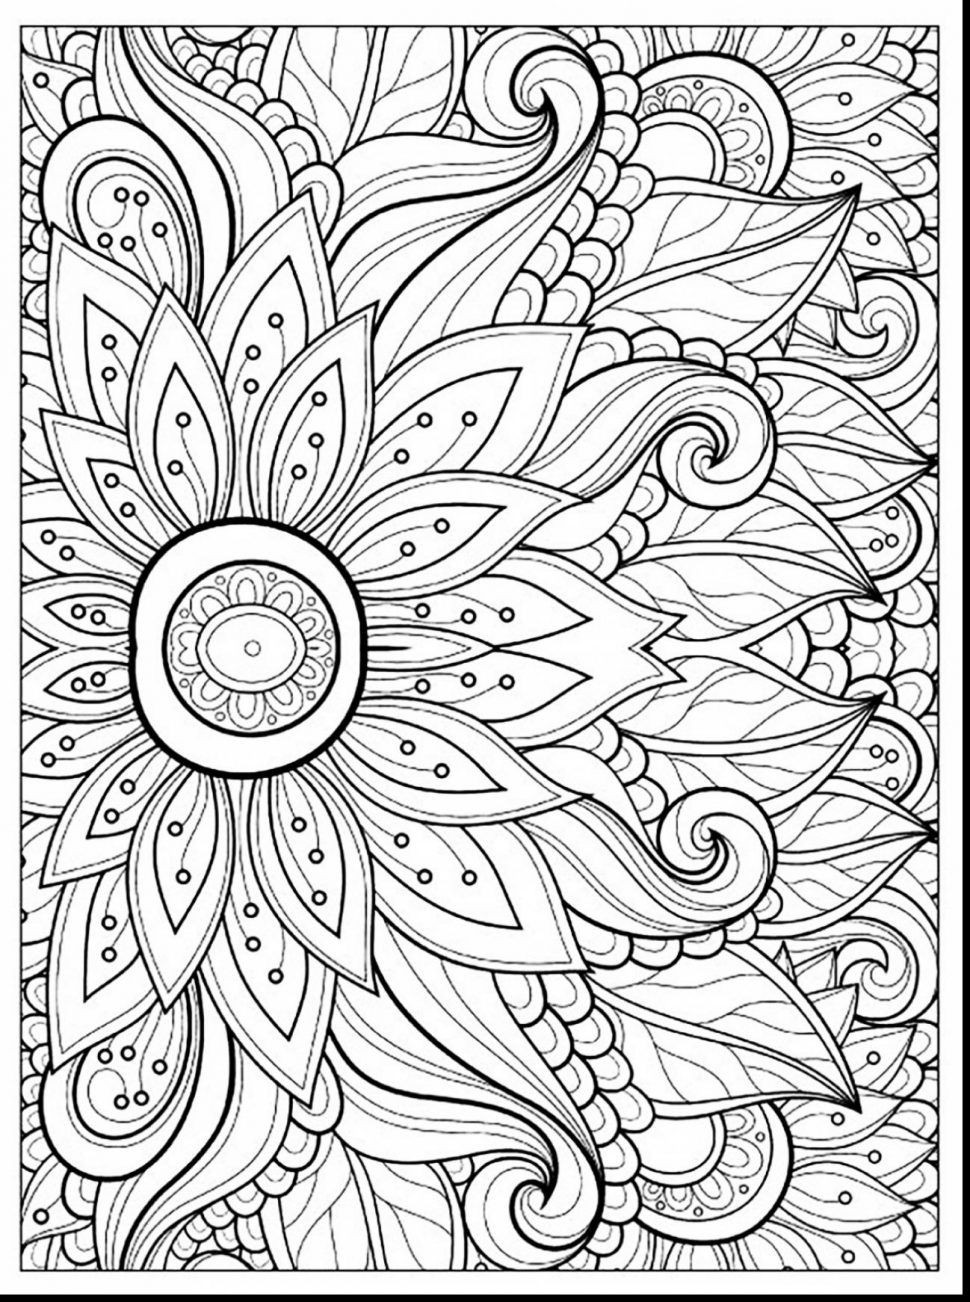 coloring books : Coloring Sheets Middle School Fresh Luxury Idea Coloring  Pages For Middle School Math Worksheets Coloring Sheets Middle School ~  bringing